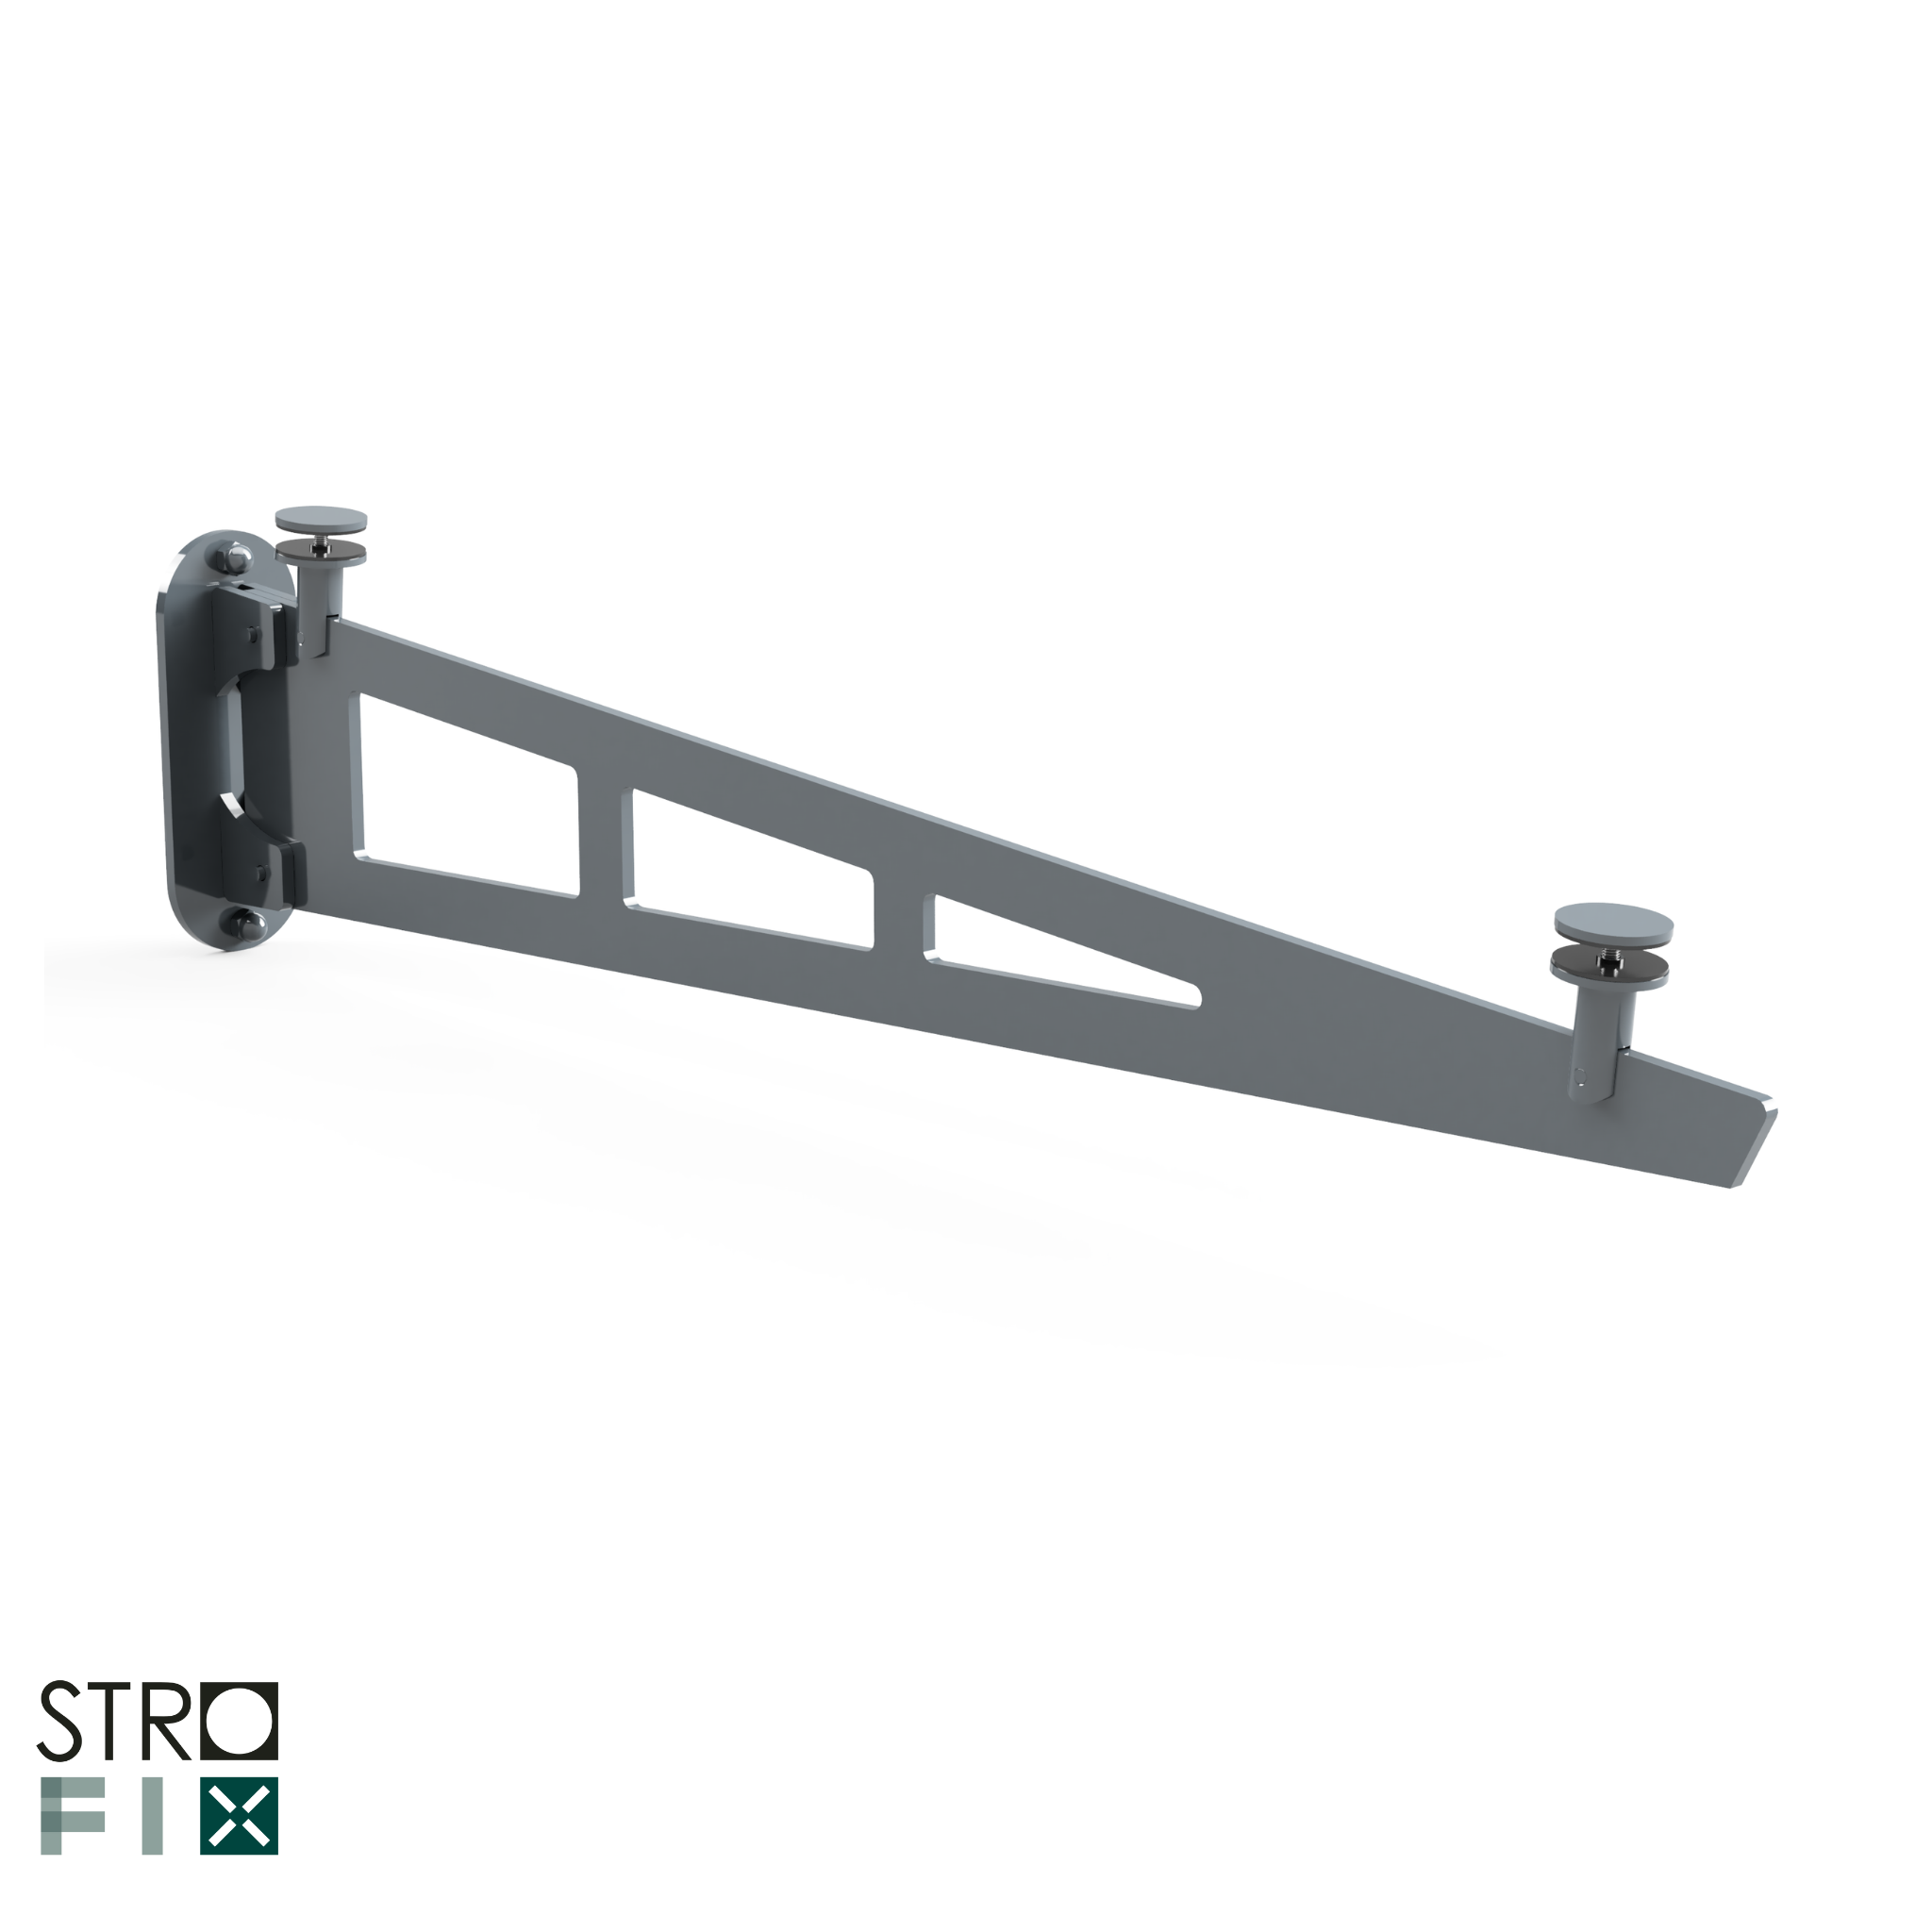 Under supported bracket for glass canopy - StroFIX